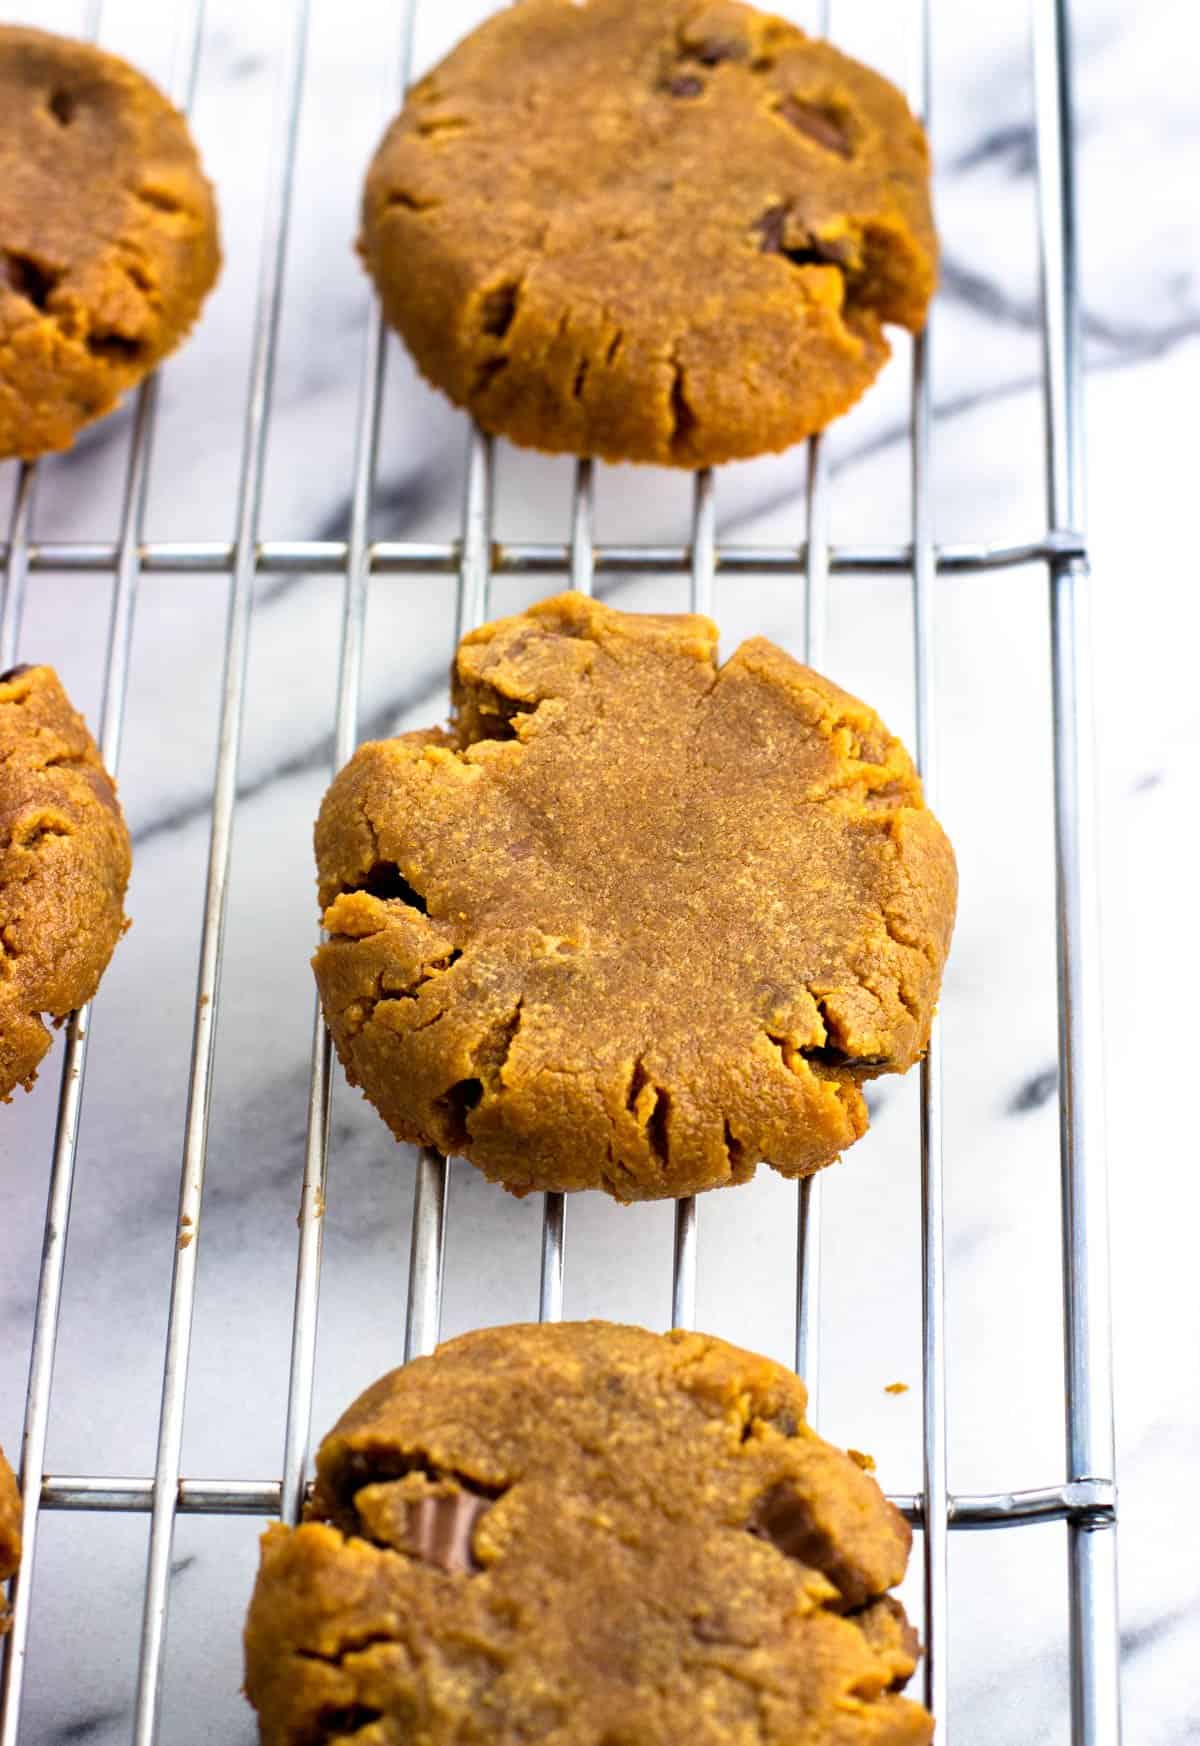 Cooling flourless peanut butter cookies on a wire rack.